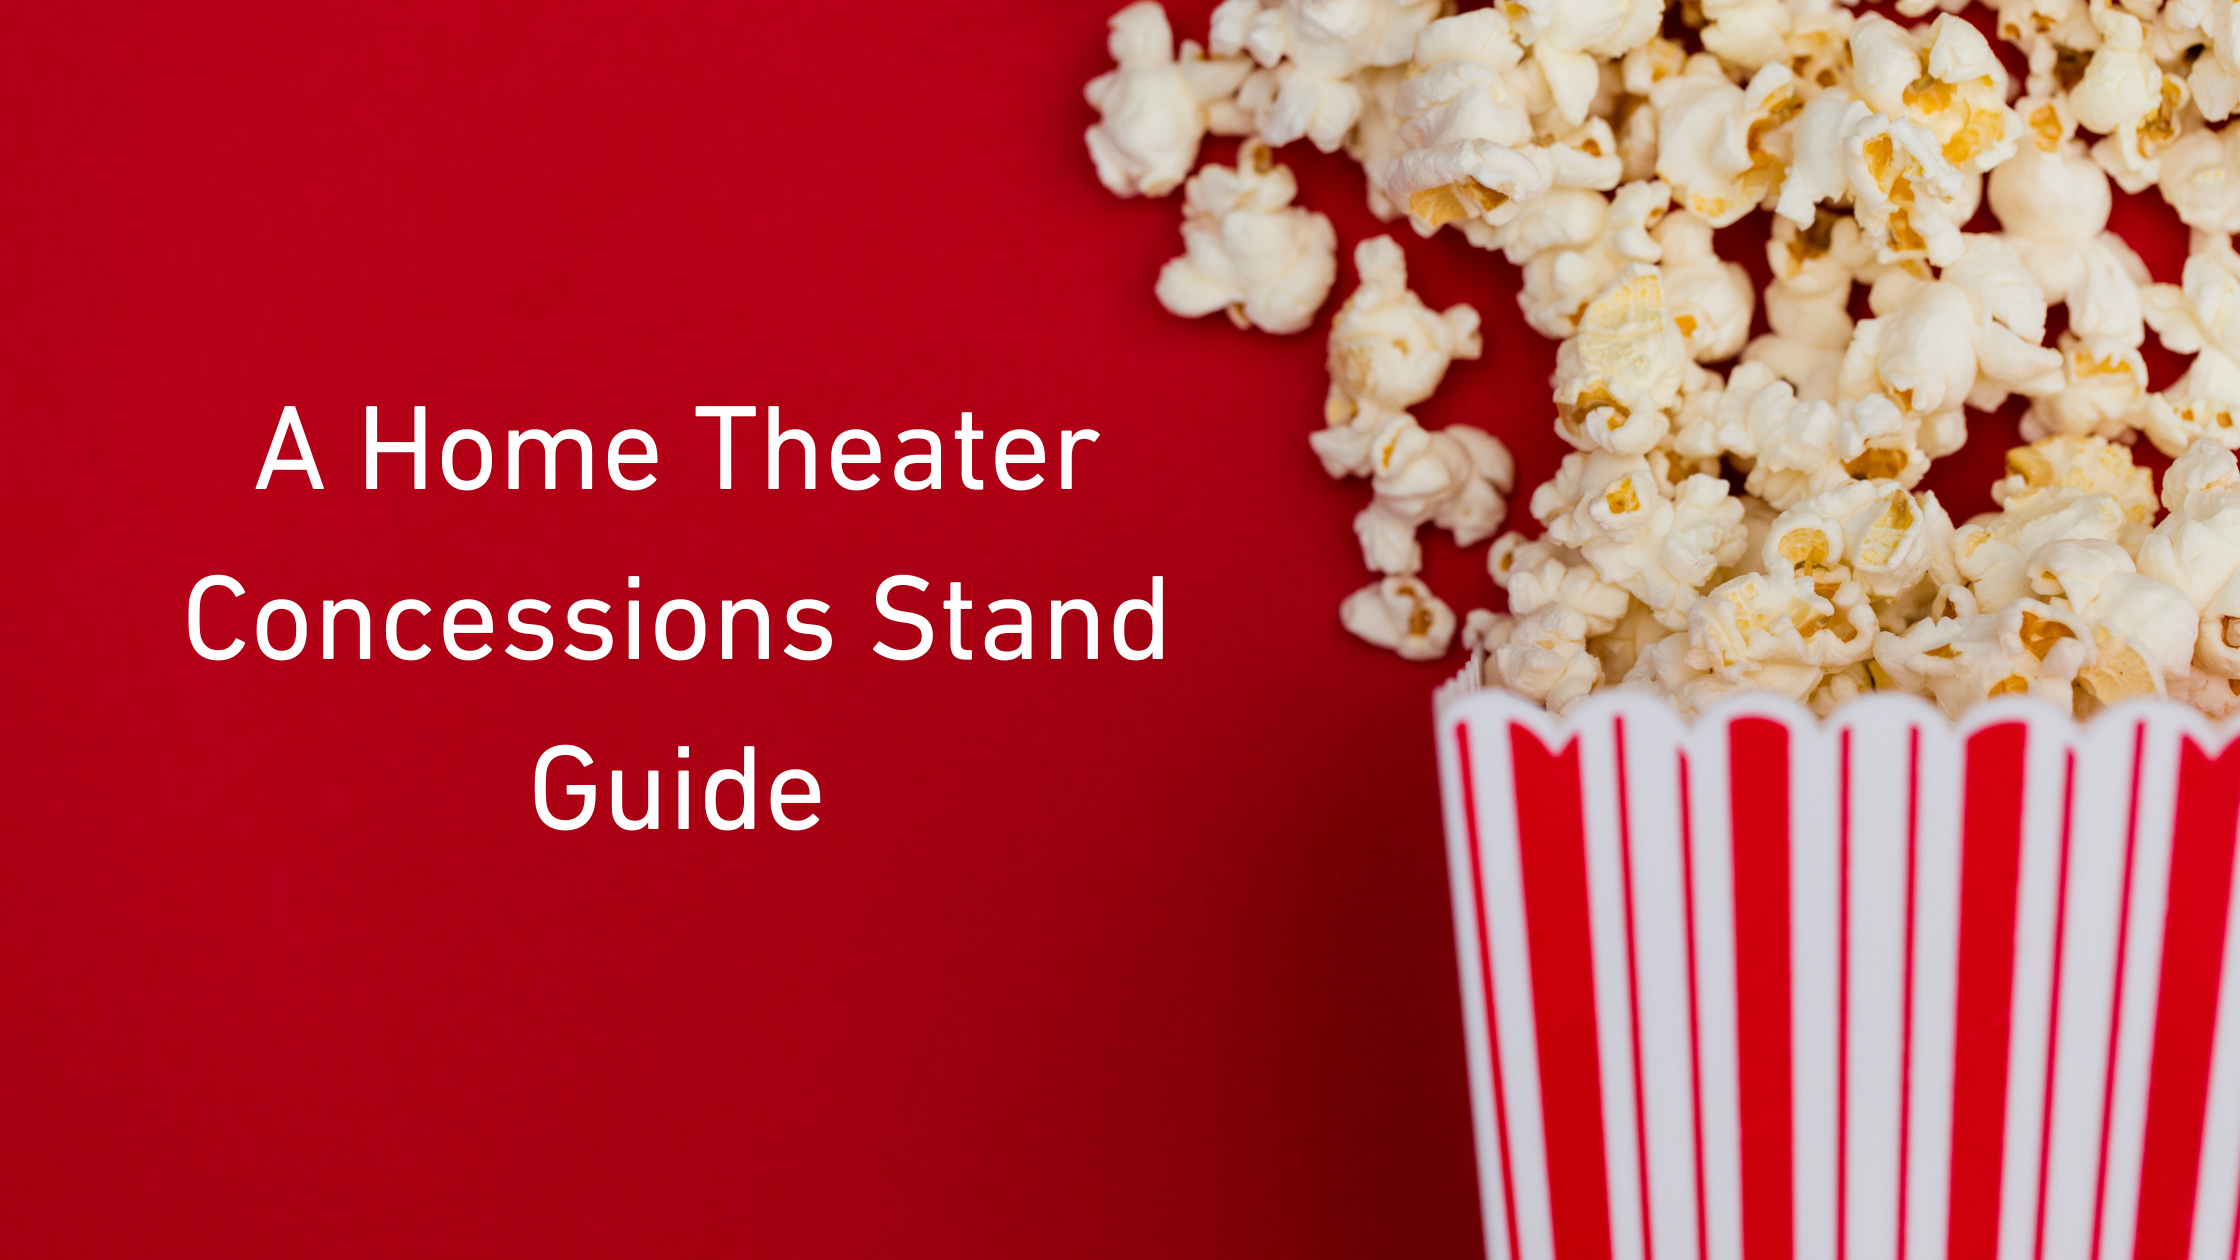 A Home Theater Concession Stand Guide Blog Post | Home Theater Mart | An Online Supplier of Home Theater Equipment, Furniture, and Decor